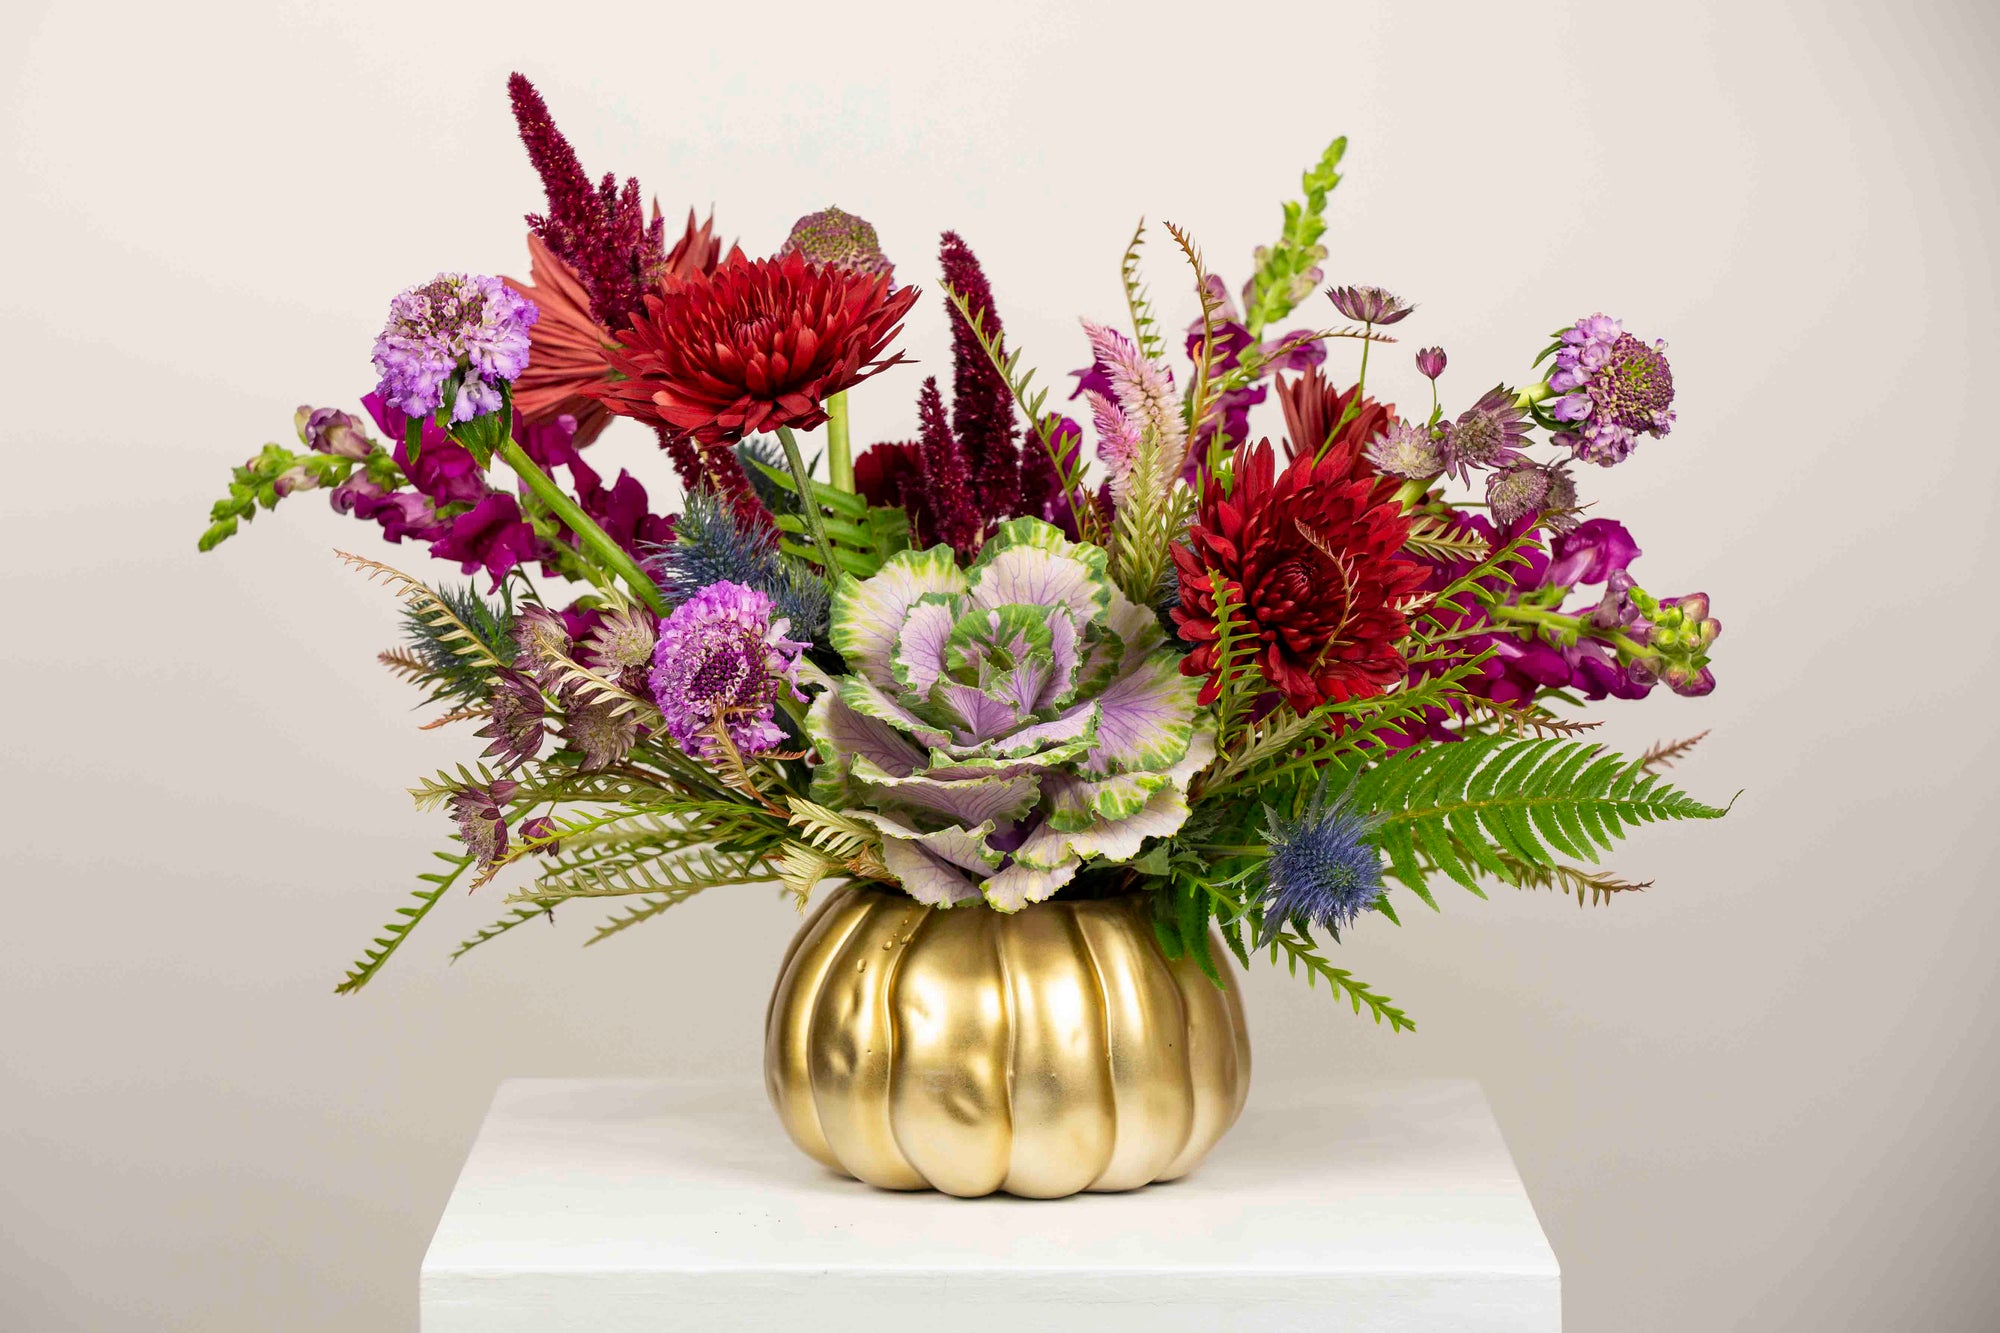 Kansas City Flower Delivery. Fall flowers in pumpkin vase with kale, cremons, amaranthus, snapdragons and blue thistle. Same day flower delivery for centerpieces and Thanksgiving flowers.